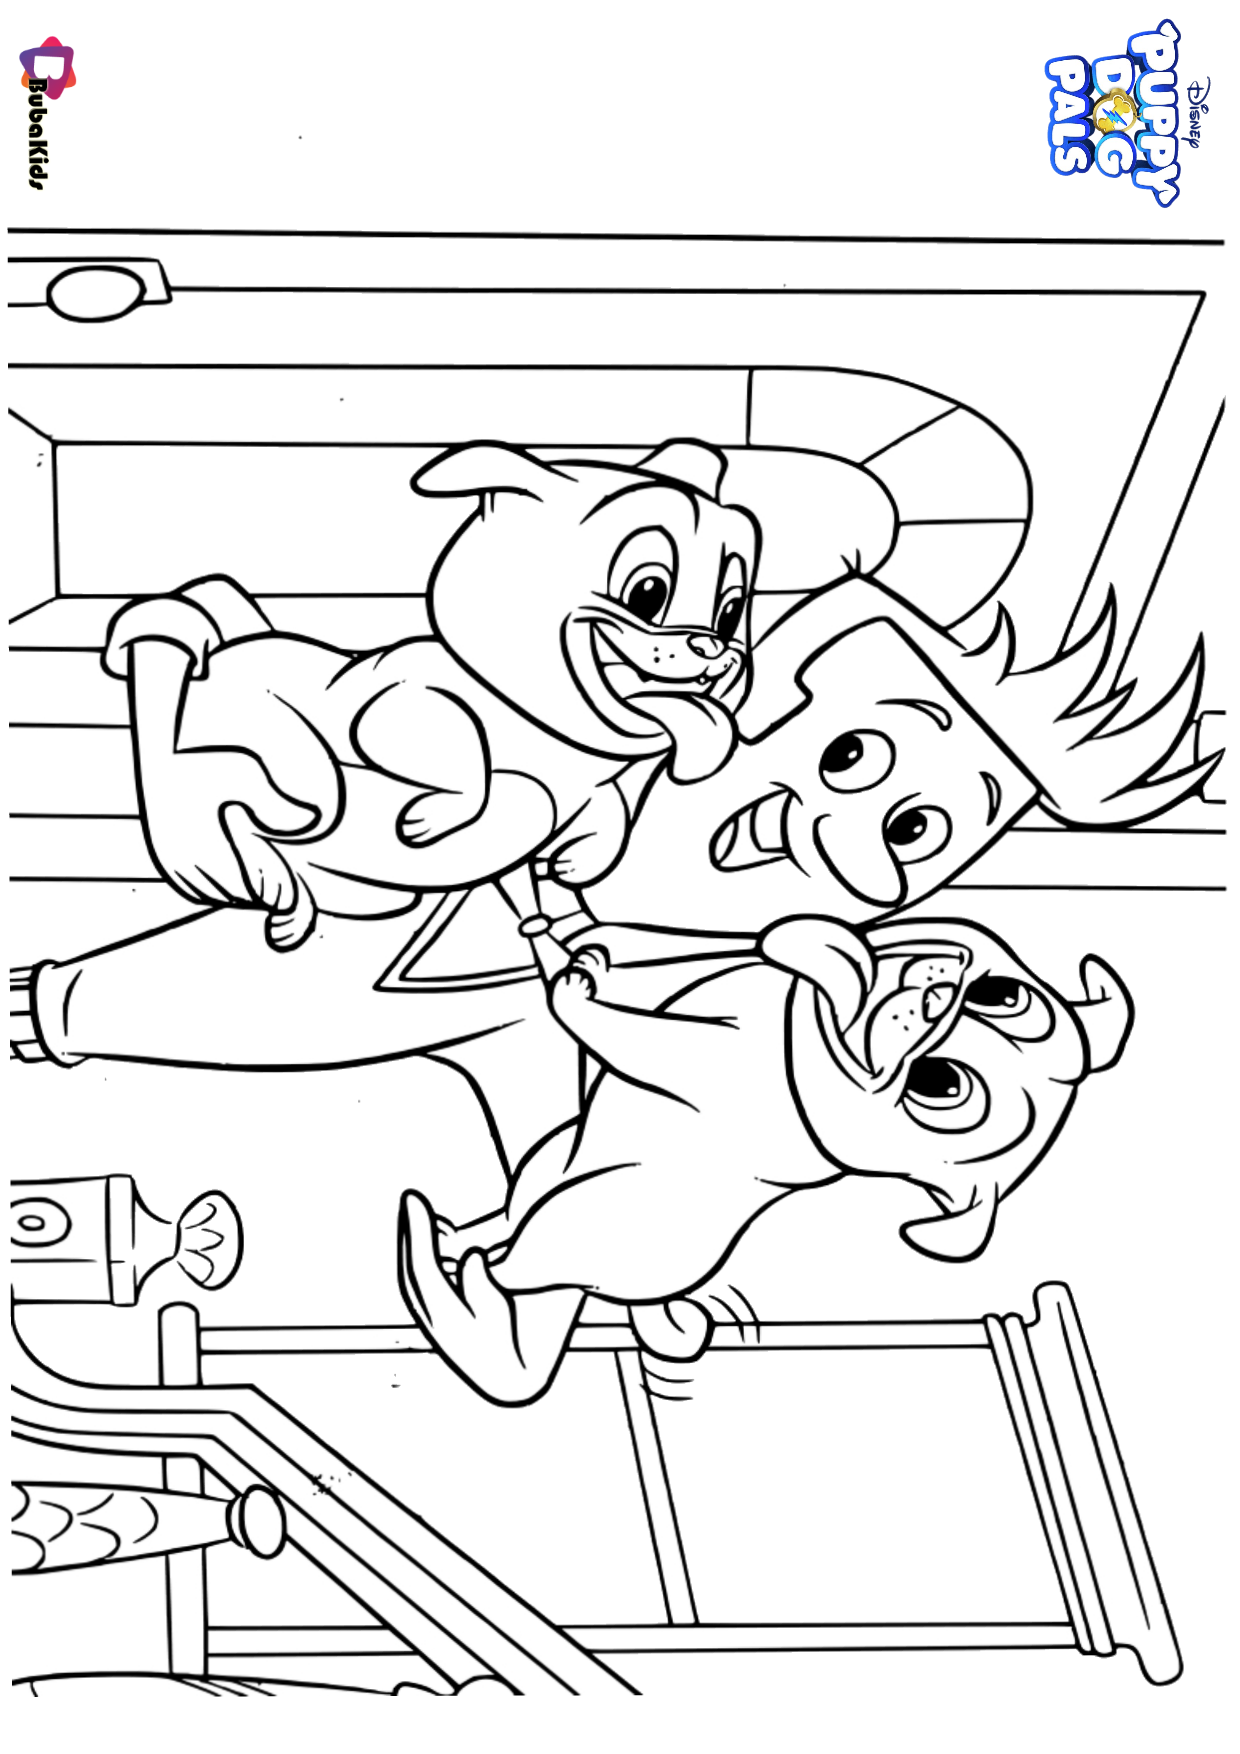 Free download to print Disney Puppy Dog Pals coloring page